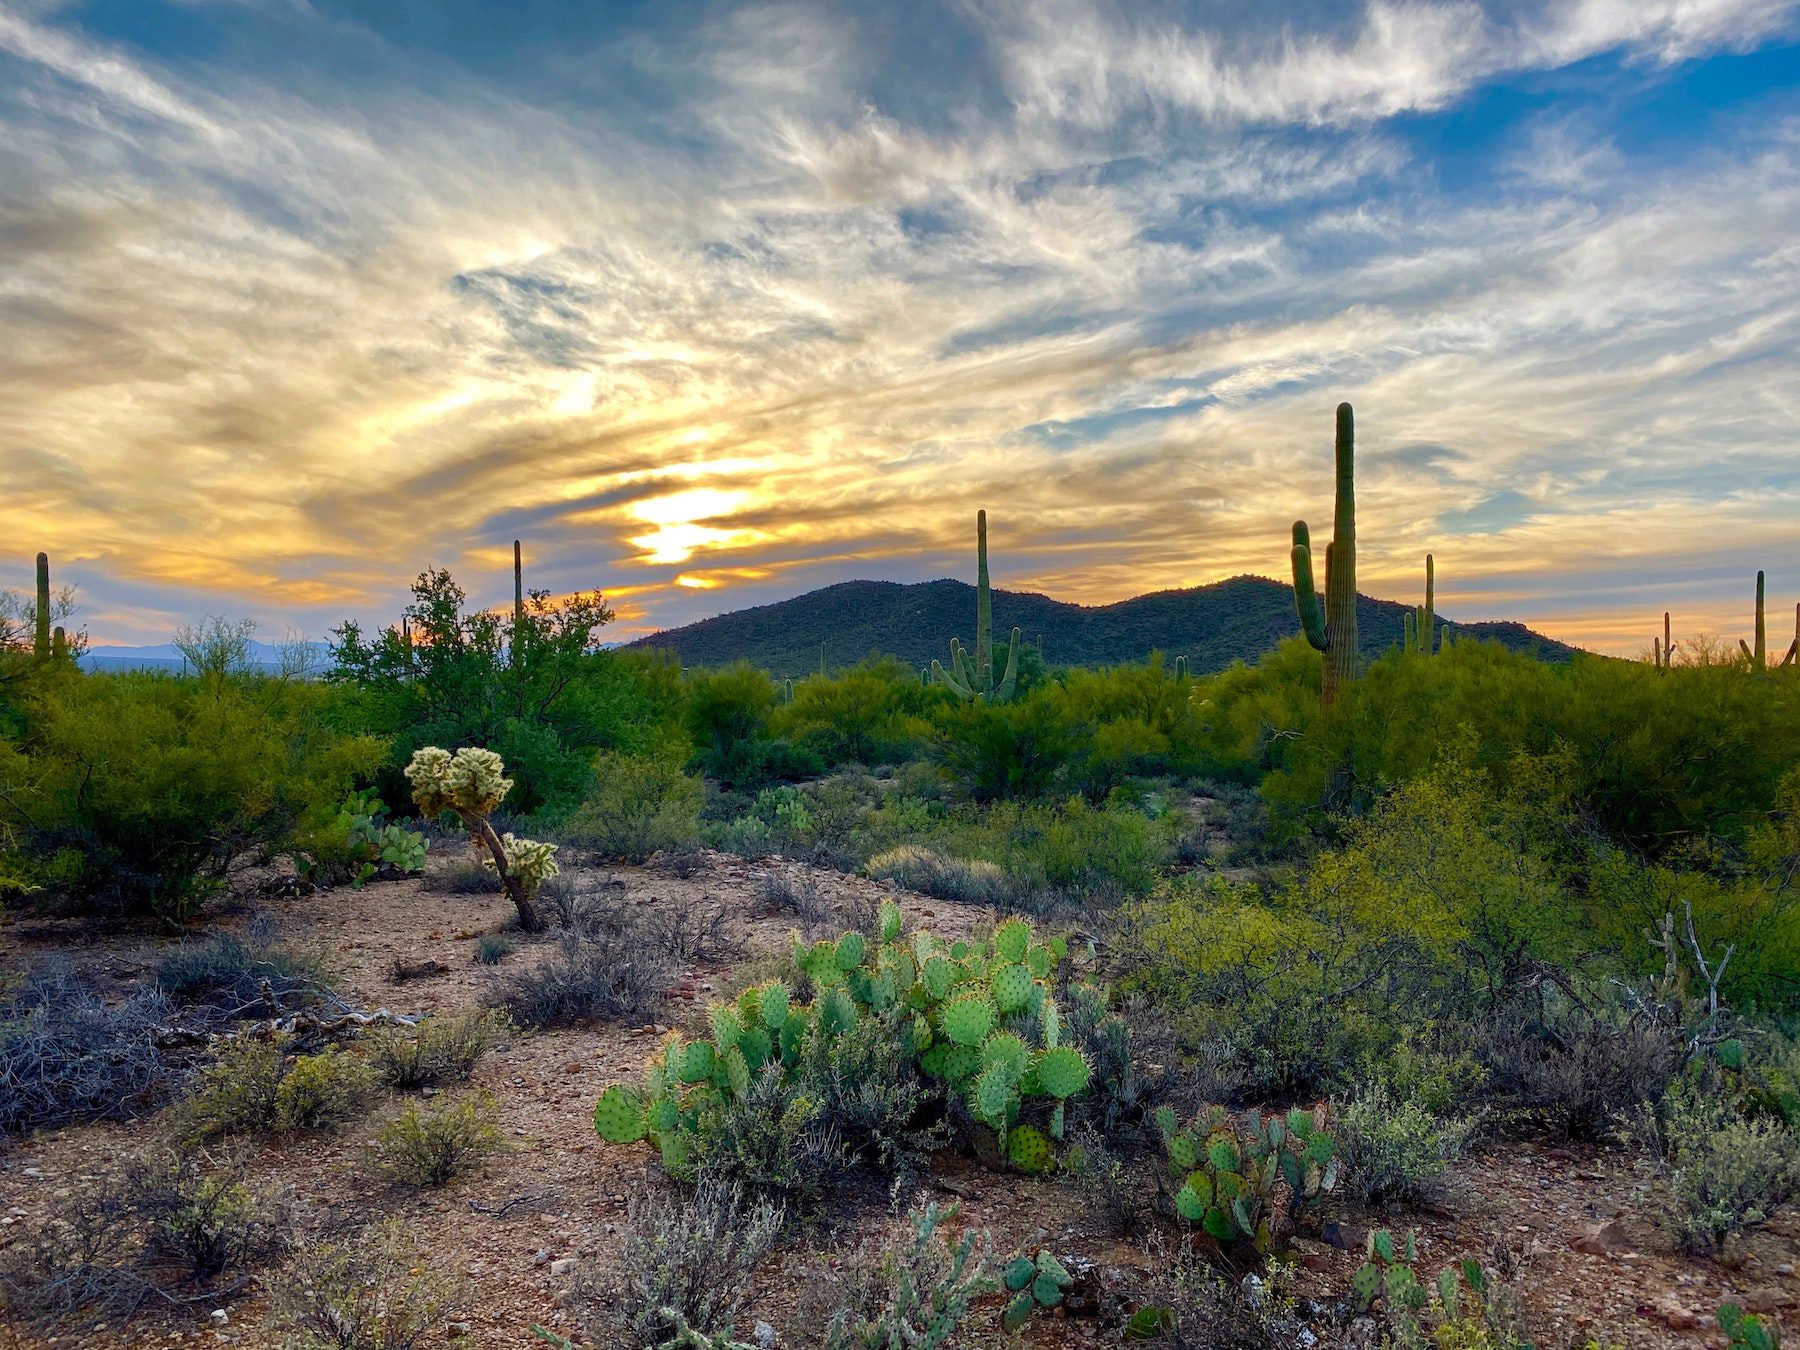 A cloudy sunrise over desert in Saguaro National Park with desert greenery and hills in the background